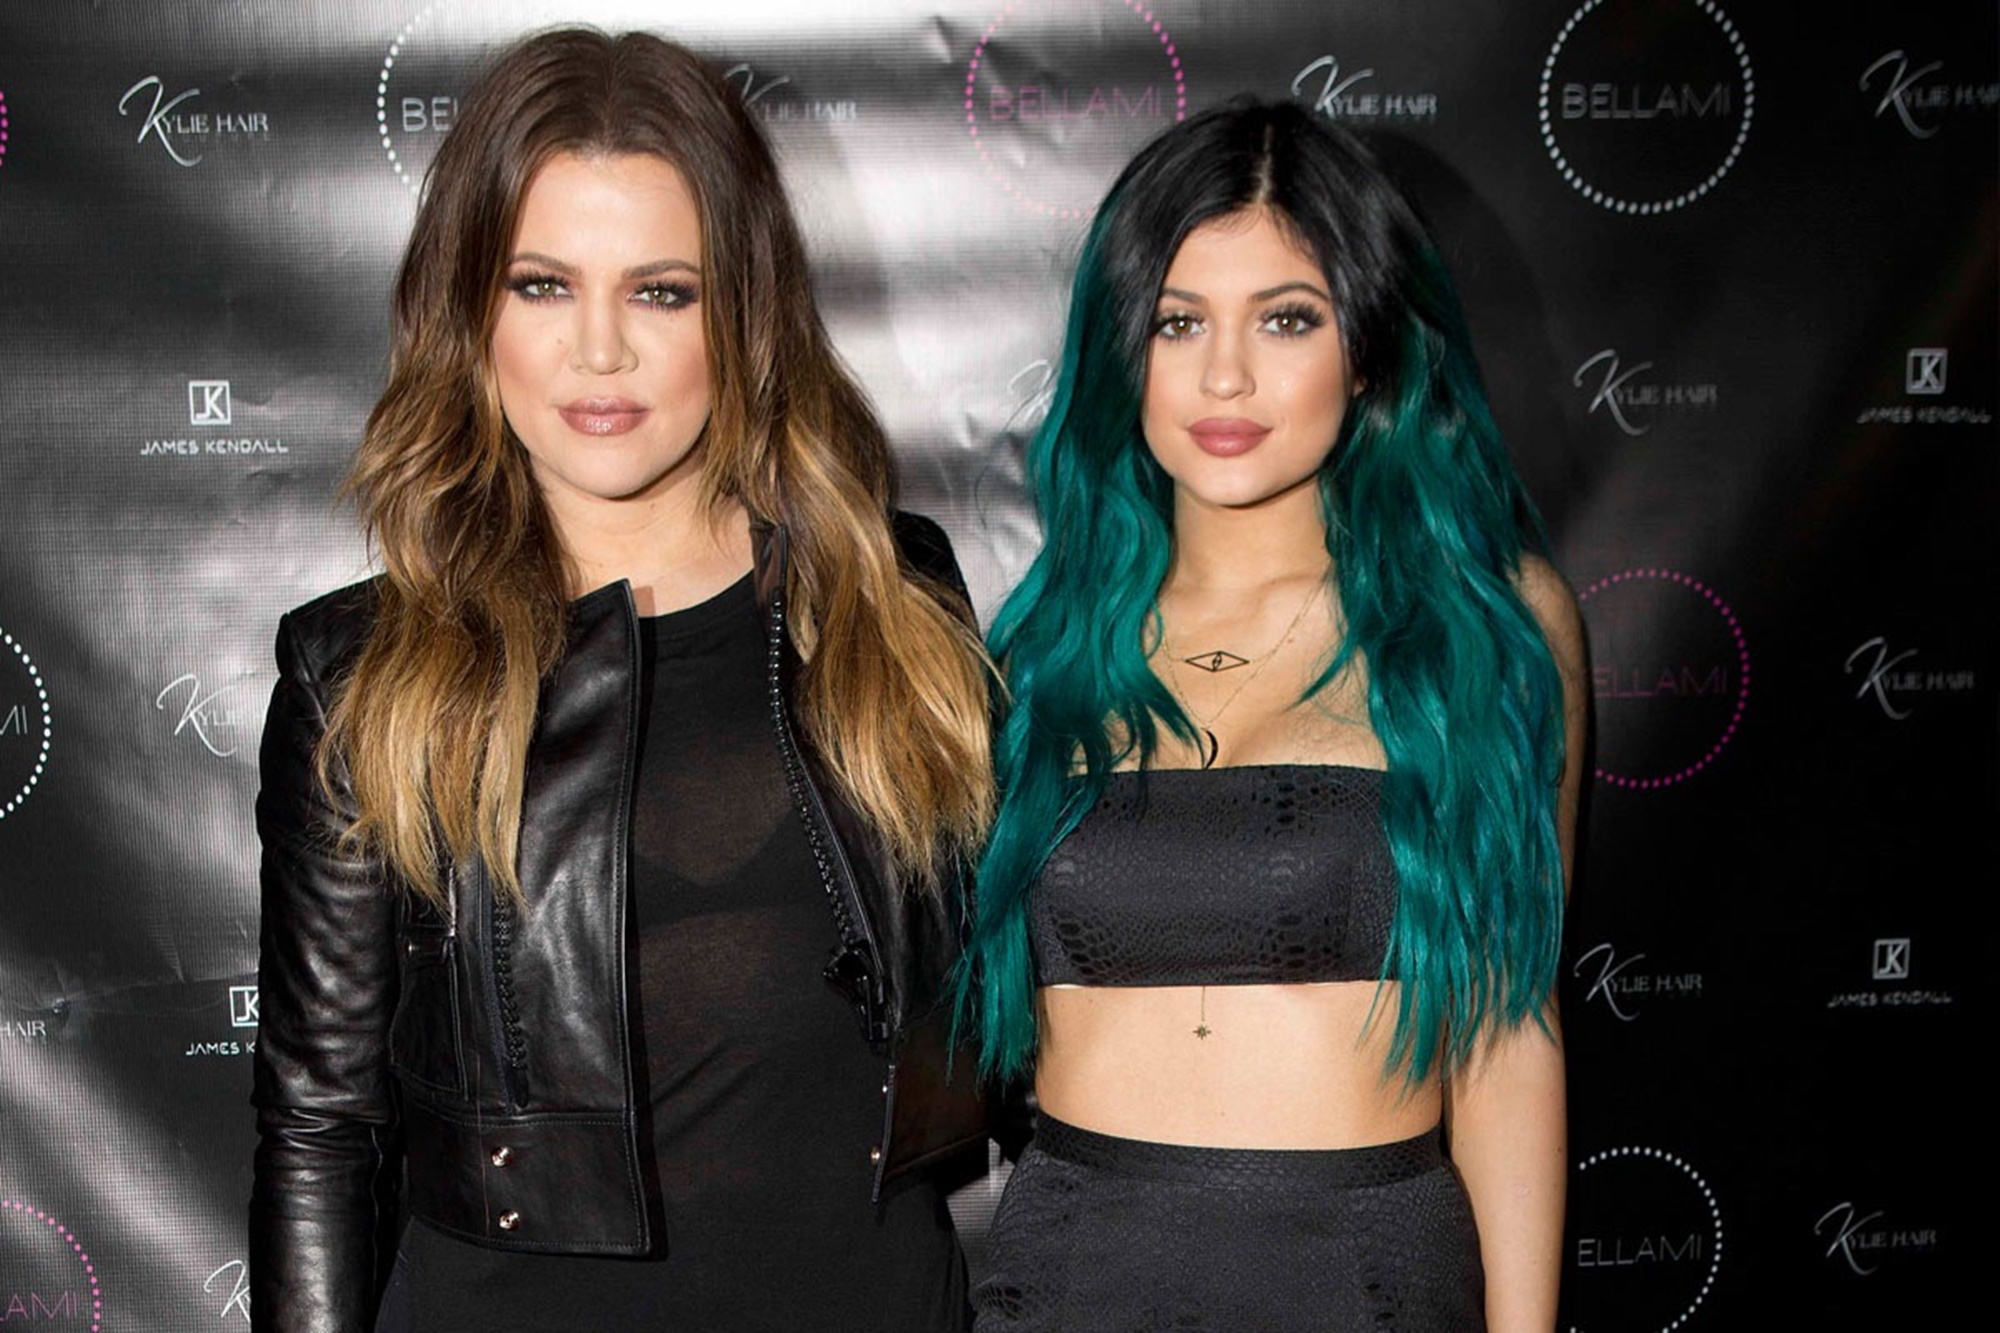 Khloe Kardashian and sister Kylie Jenner share post-baby workouts after giving birth 